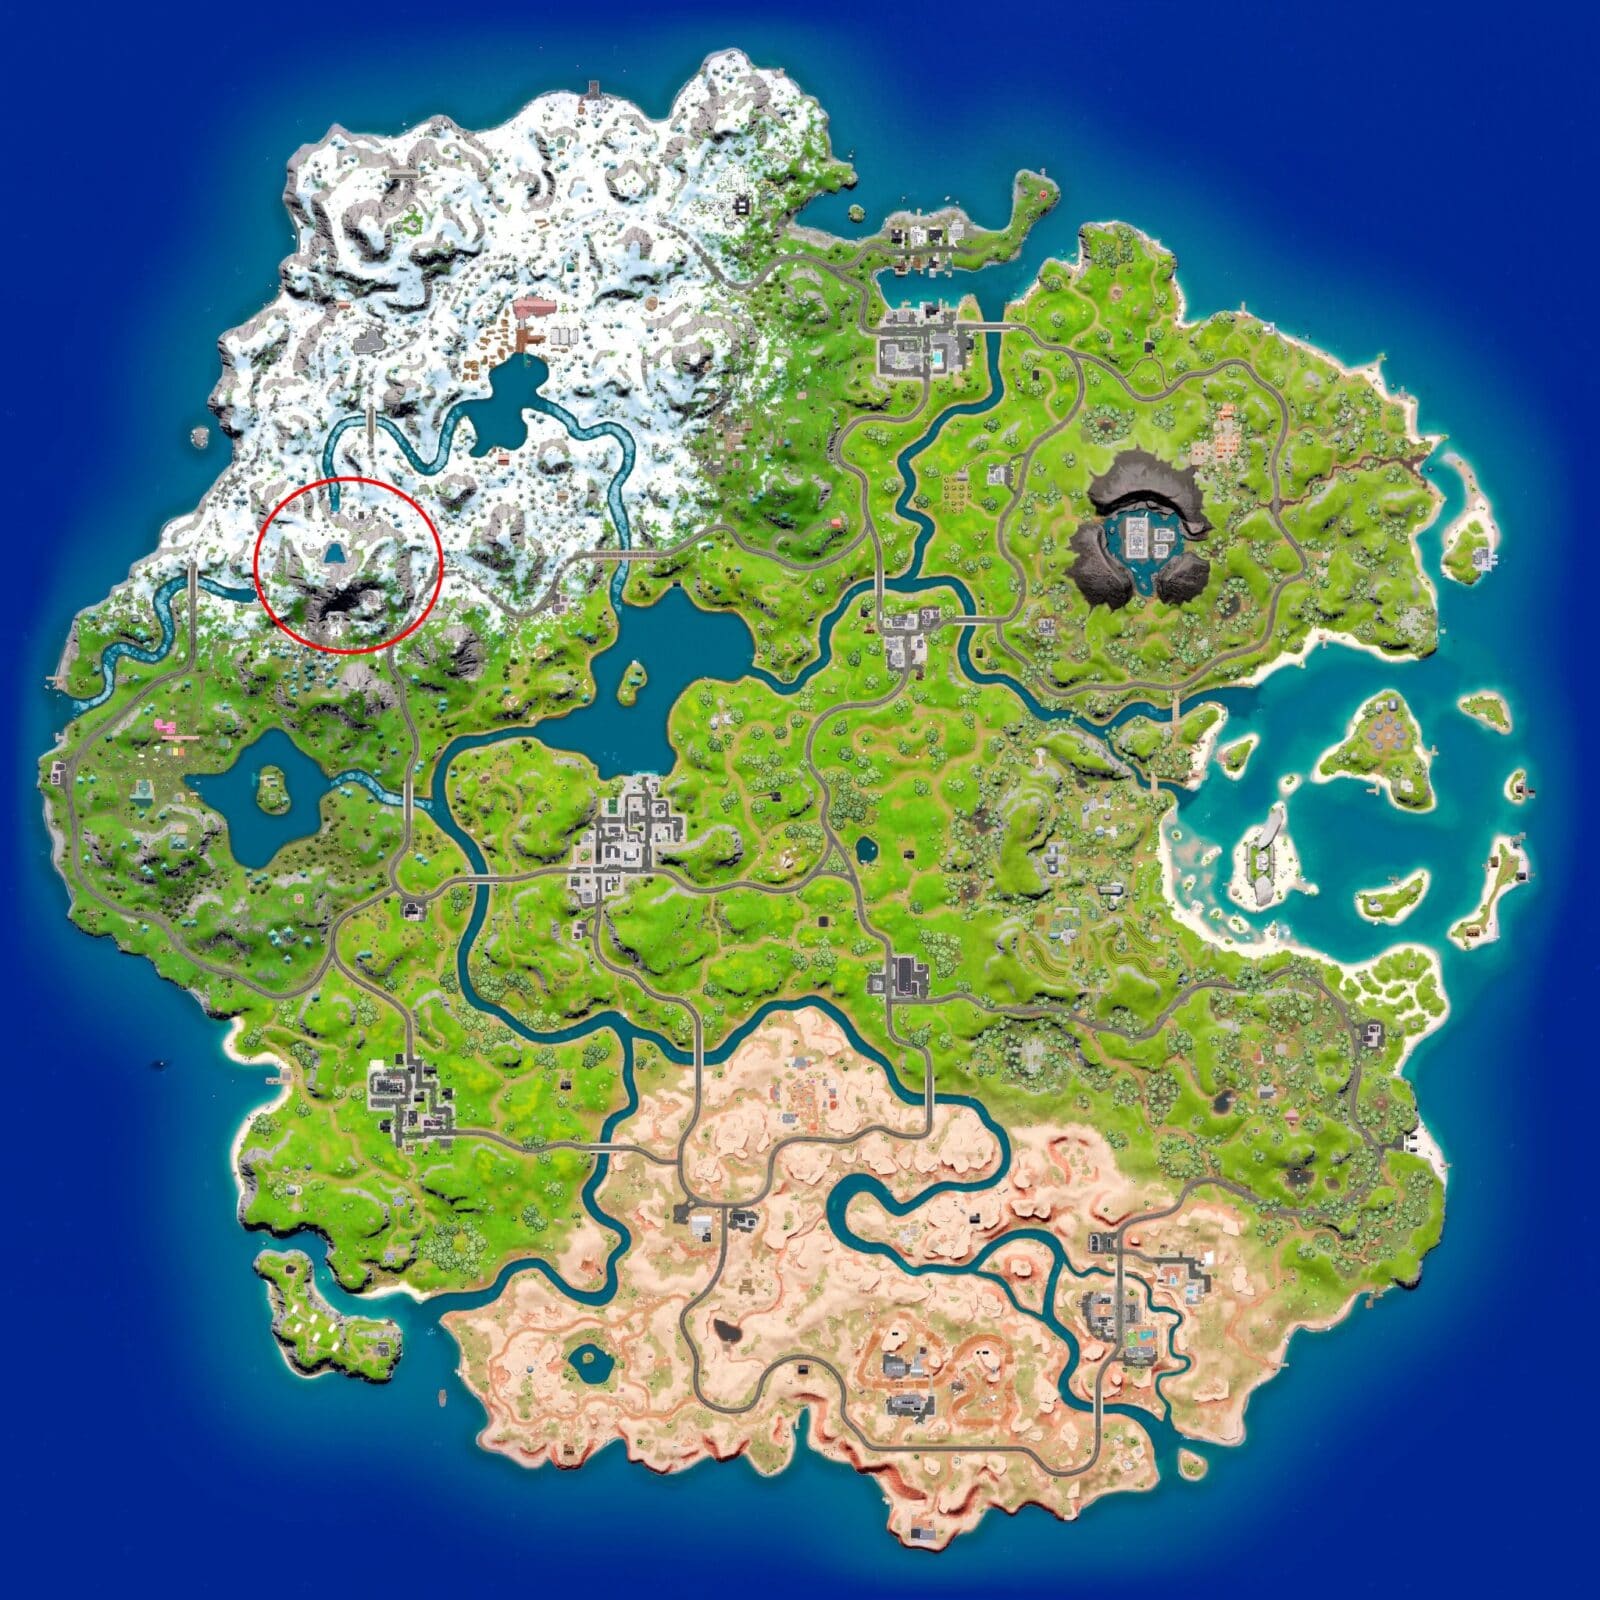 The Fortnite map showing the new POI in Chapter 3, Covert Cavern, marked with a red circle